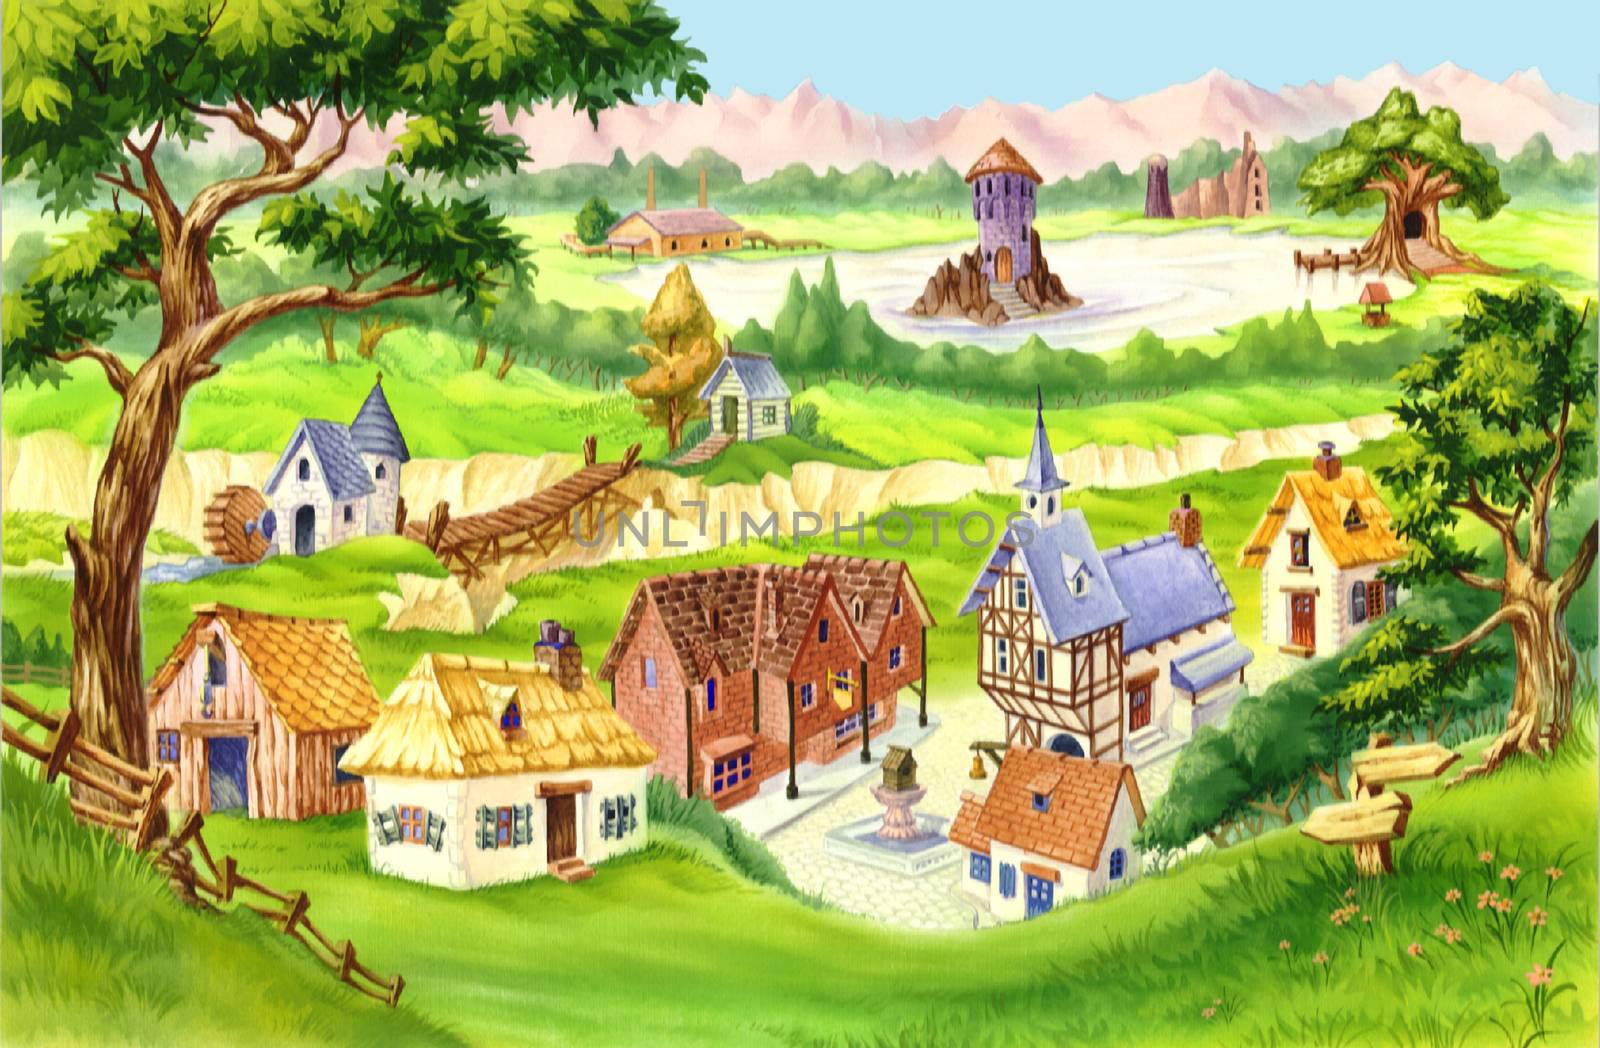 Fairytale Village. Digital Painting Background, Illustration in cartoon style character.